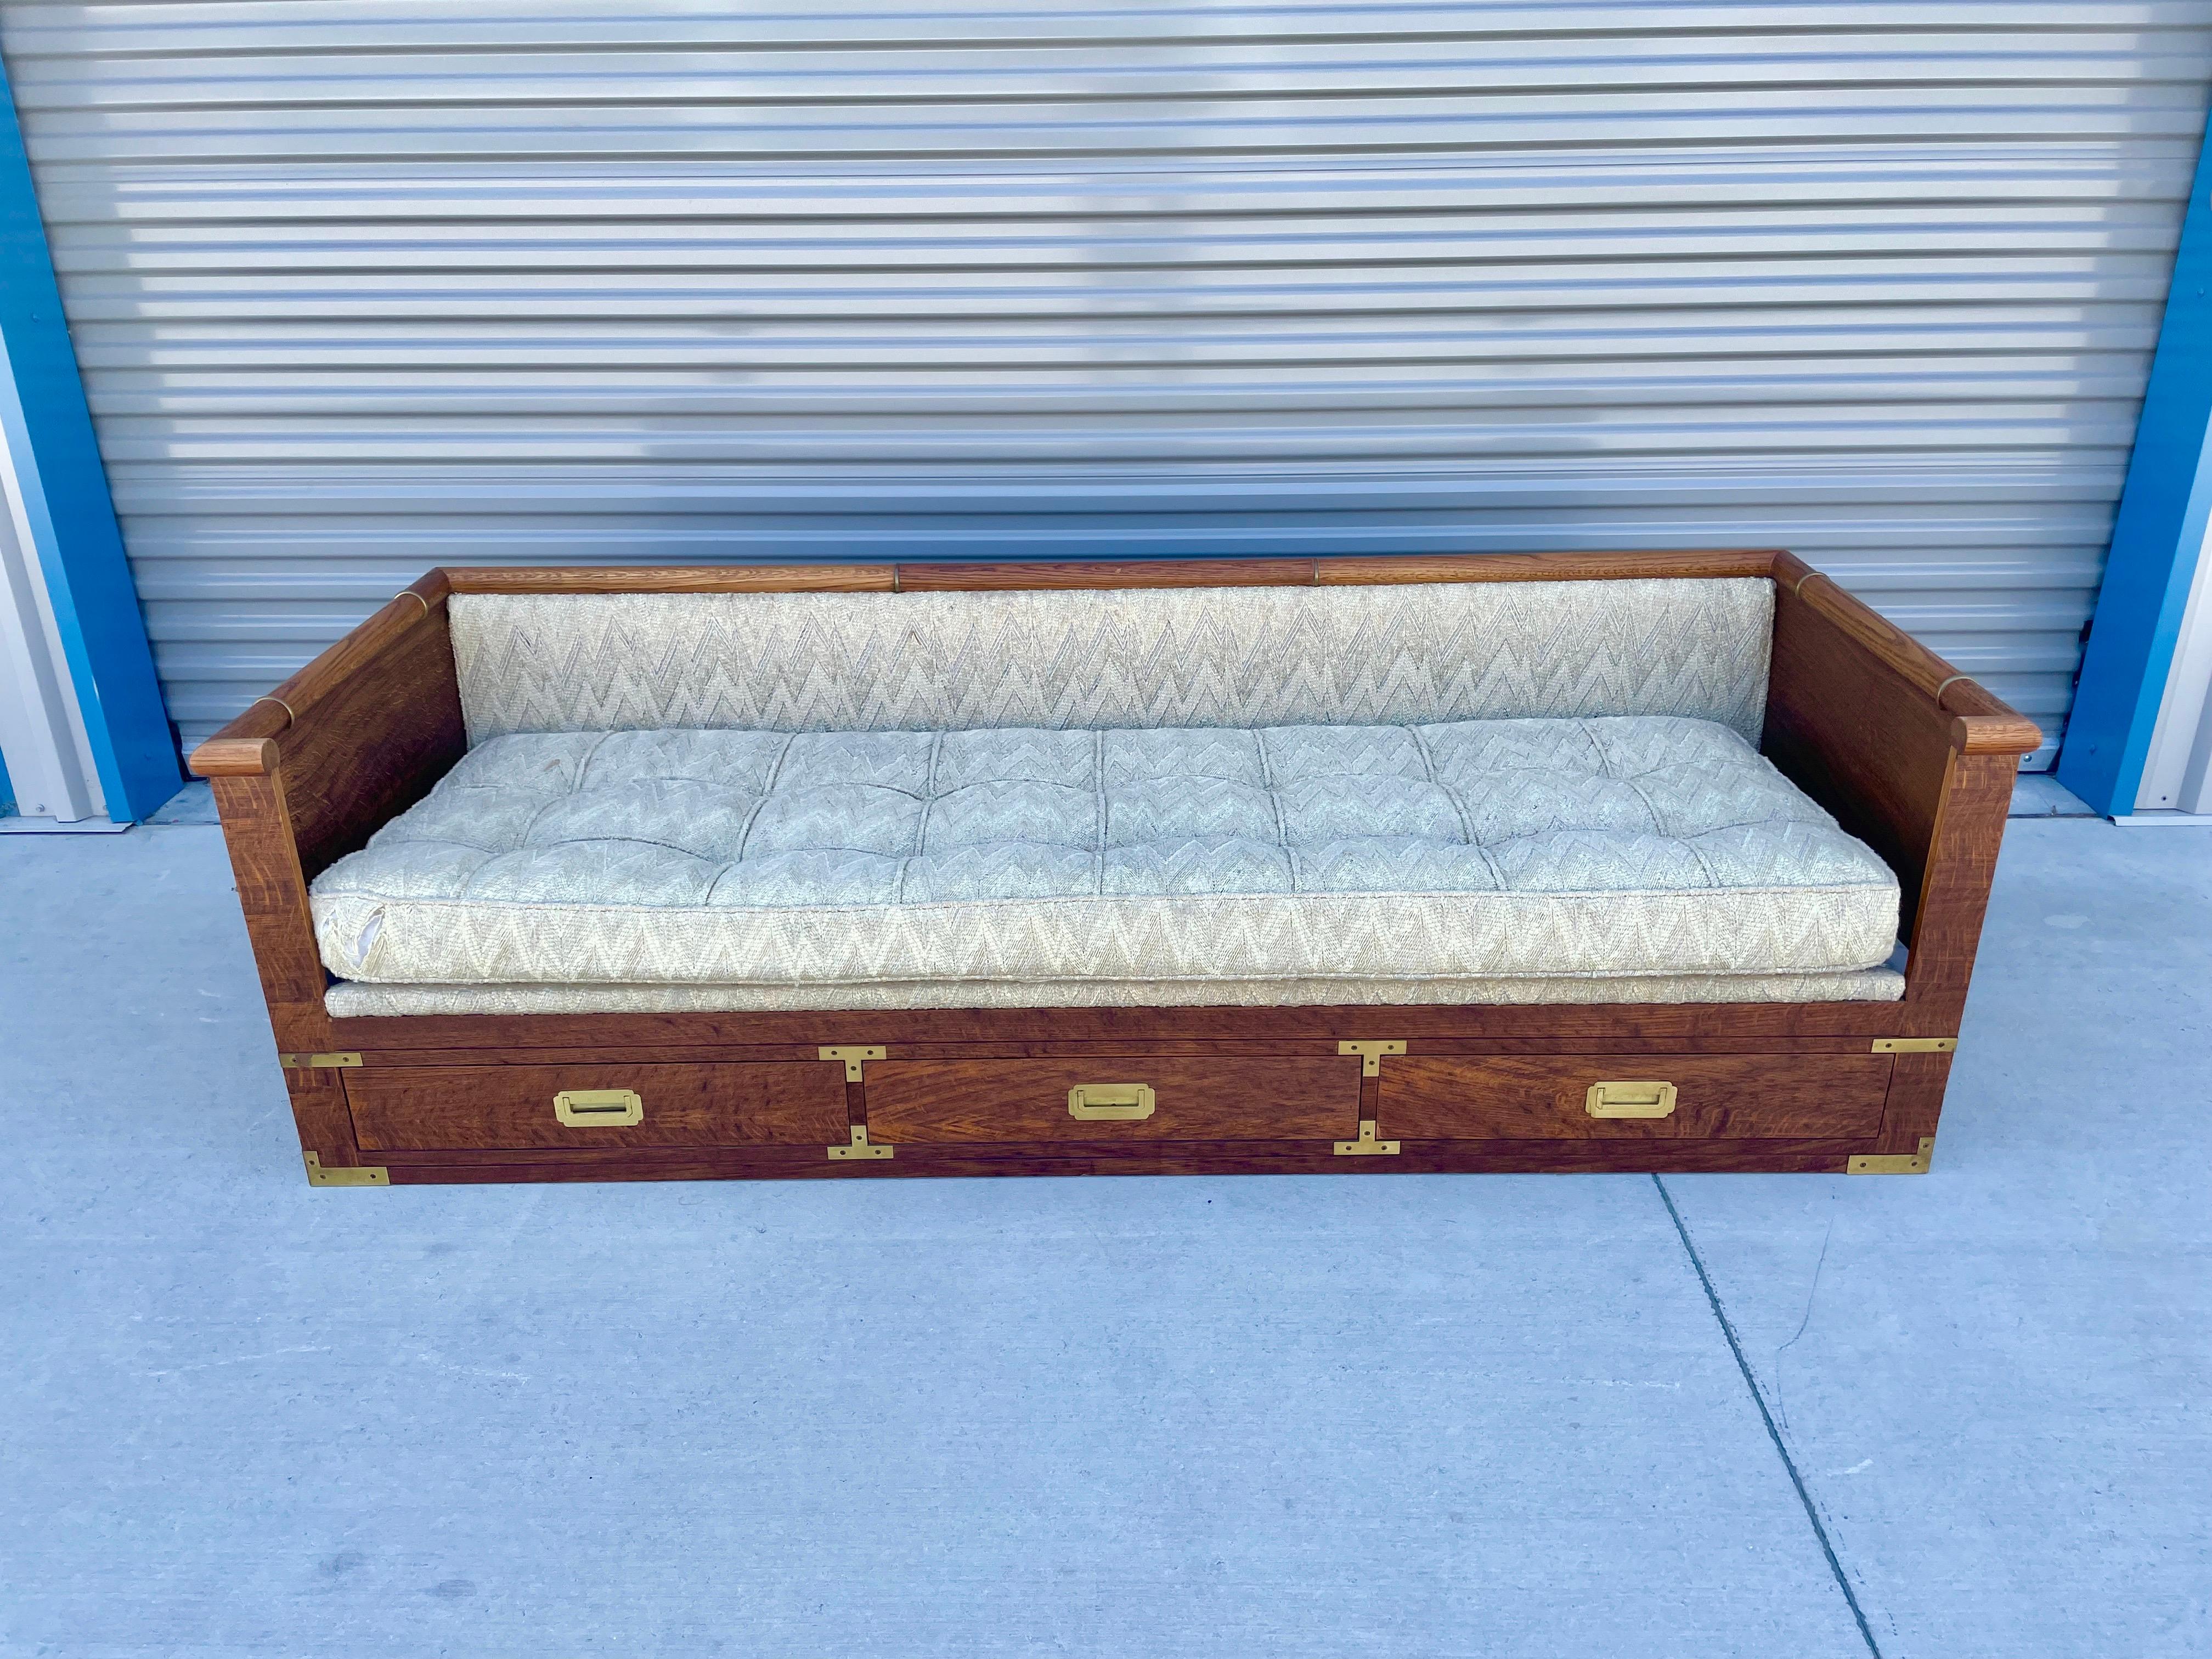 Midcentury tiger oak daybed/sofa by Marge Carson. This sofa is a wonderful piece that can use as a daybed or a sofa giving it two unique purposes. It features a tiger oak wood frame that comes with three pull-out drawers each with their solid brass